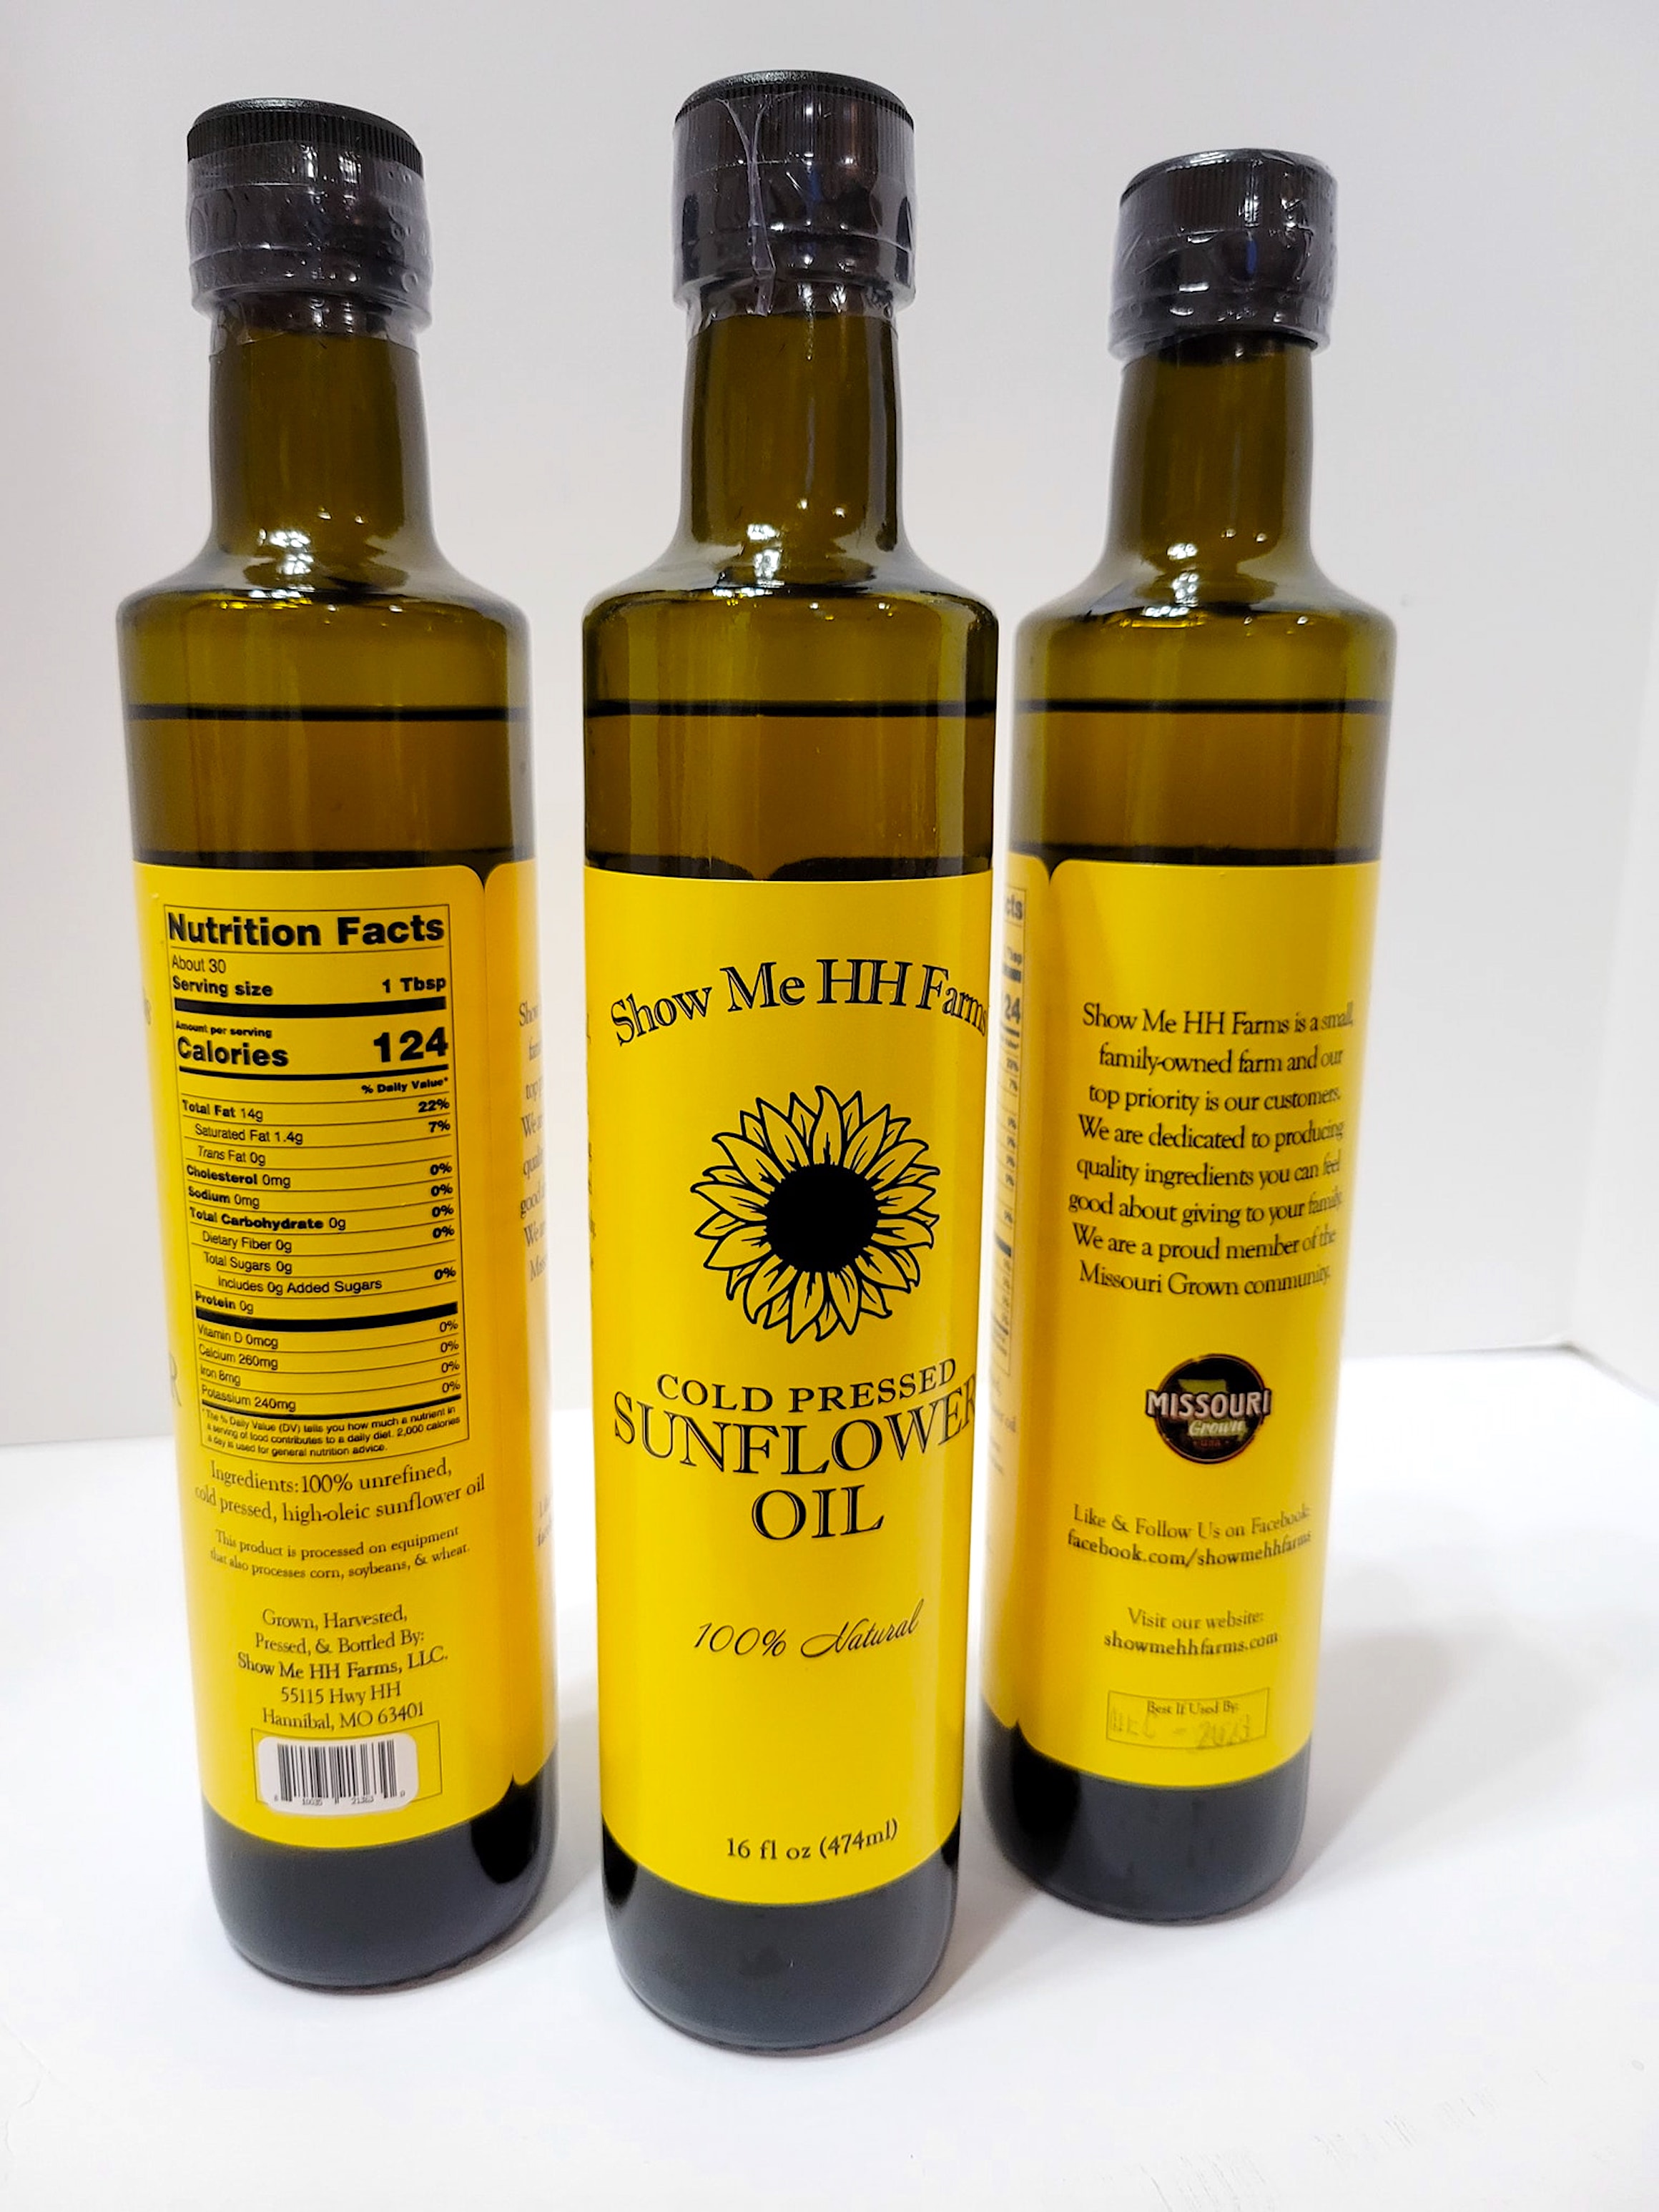 Open Show Me HH Farms of Hannibal offers cold-pressed sunflower seed oil, a primary cooking oil in many parts of the world. Photo courtesy of Amberlyn Brown.